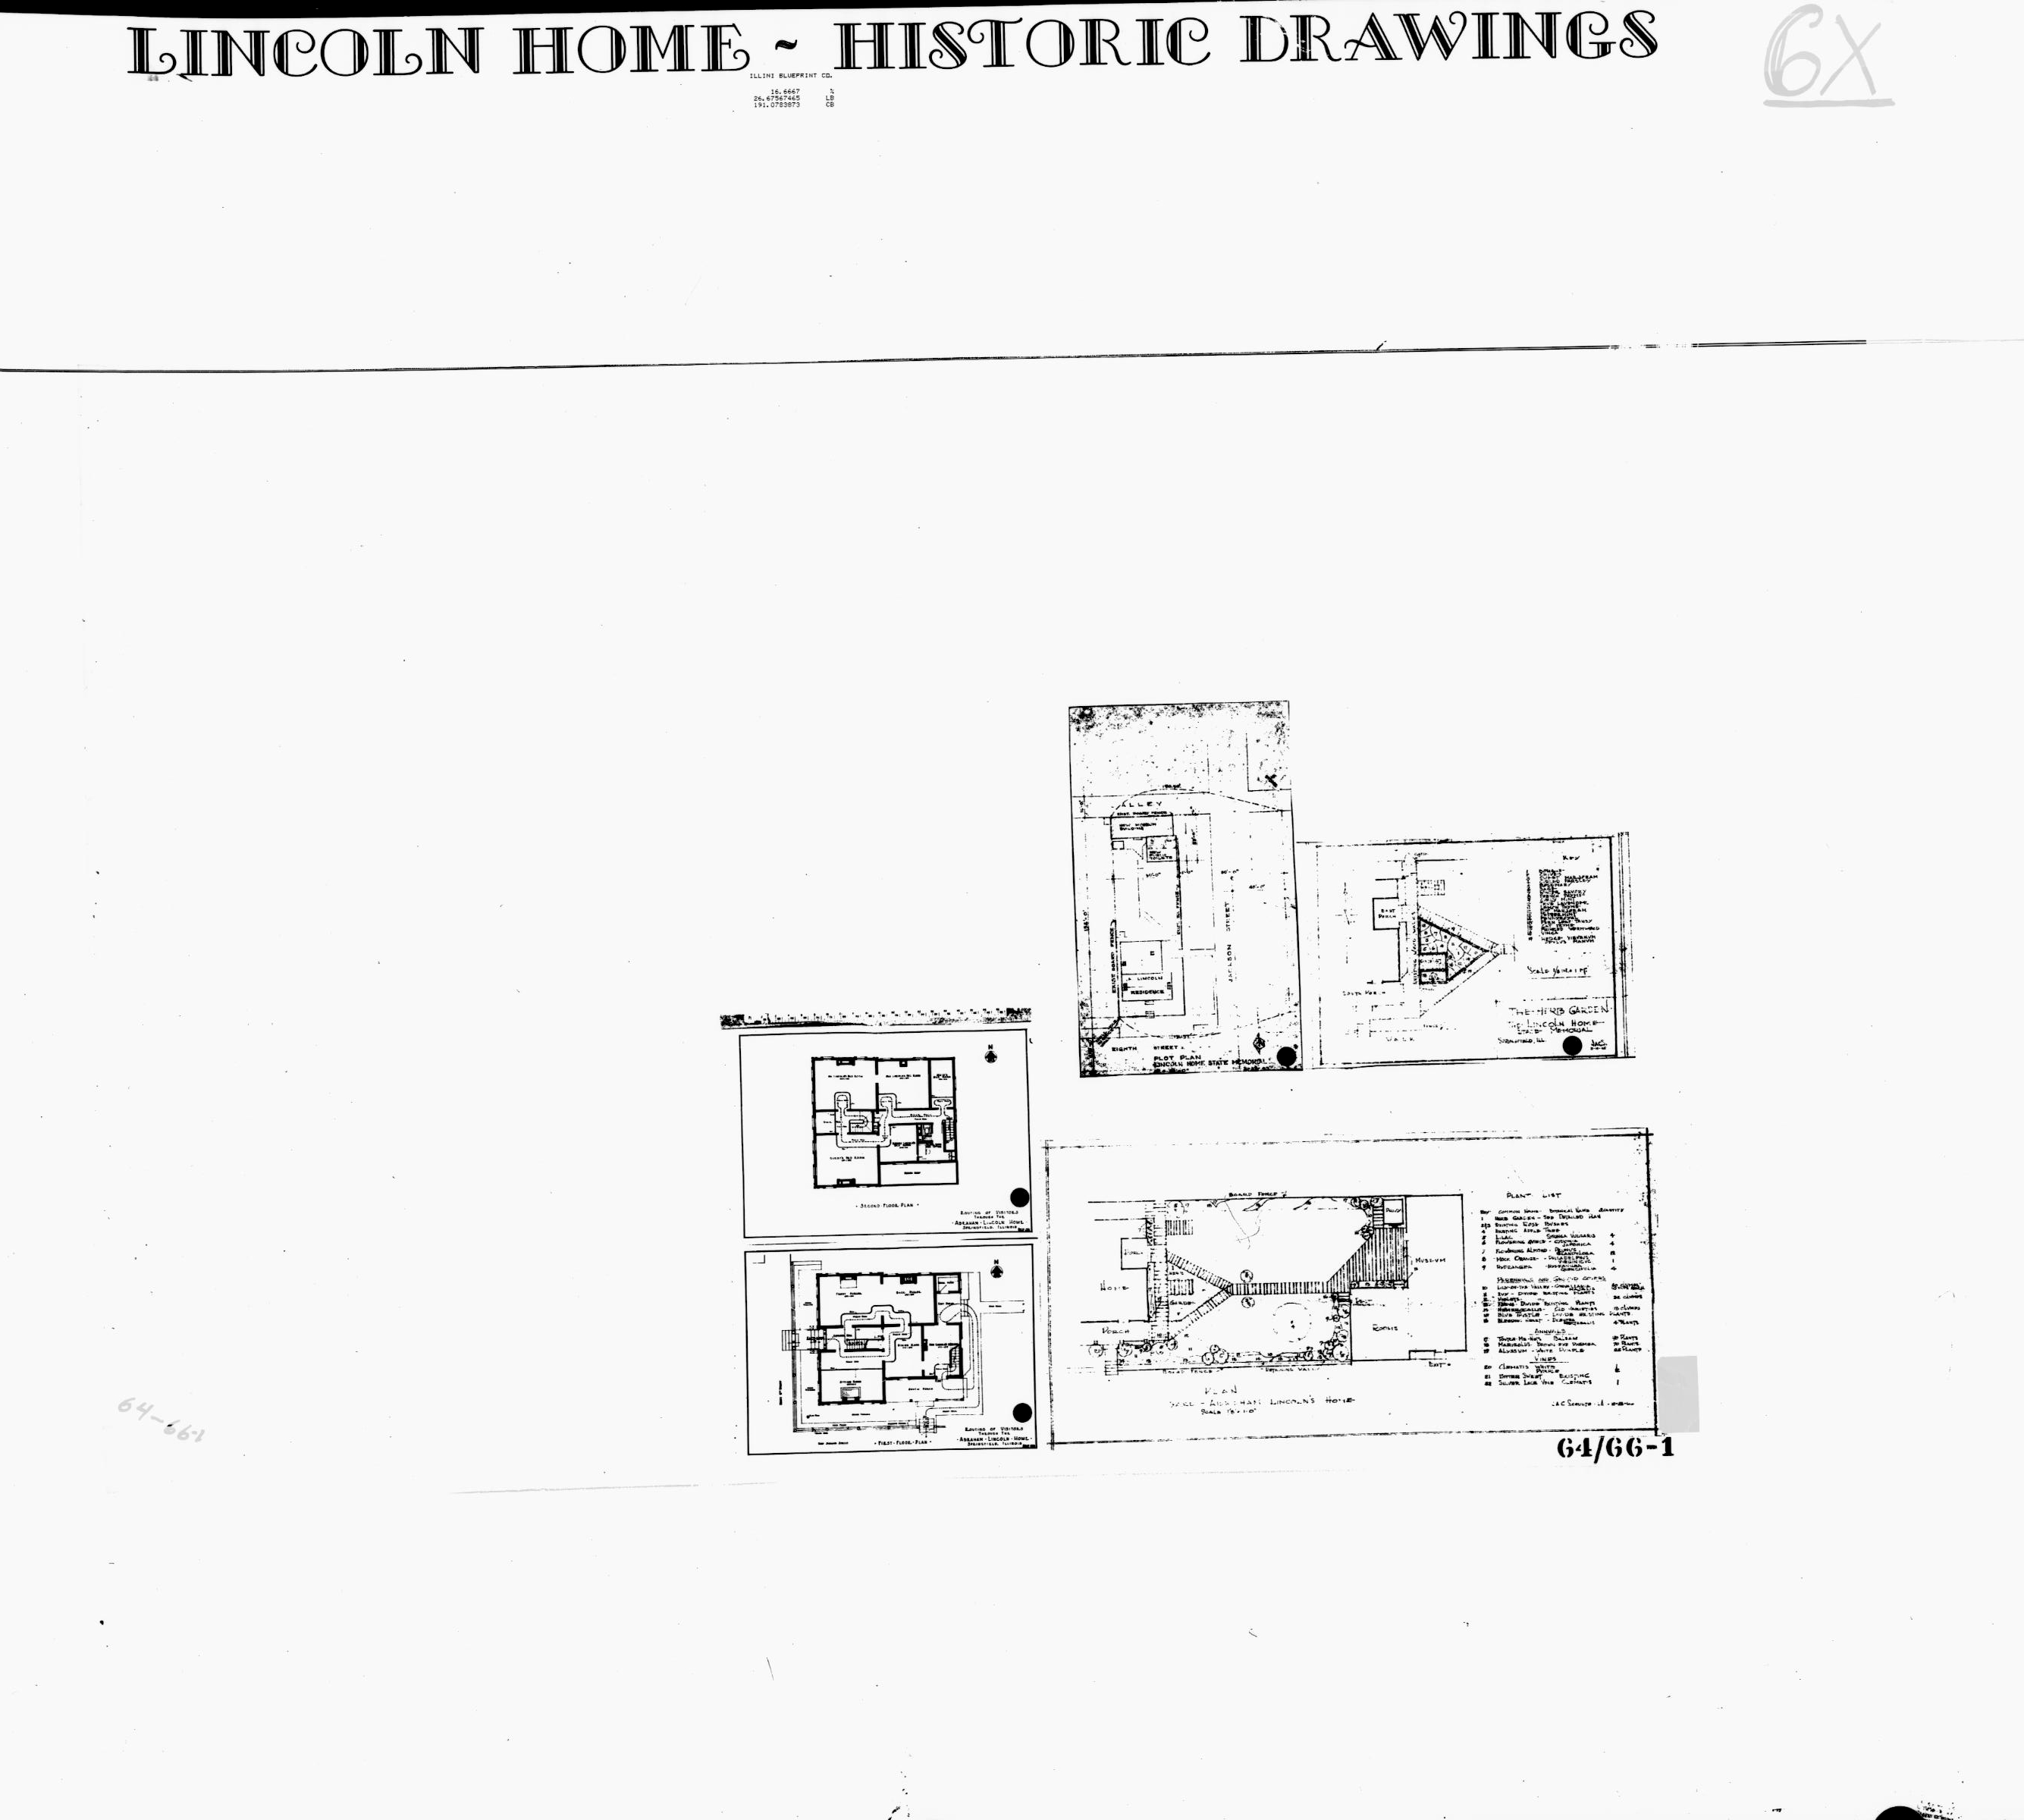 Lincoln Home - Historic Drawings  48 Lincoln, home, historic drawings, routing visitors, first floor plan, second floor plan, plot plan, herb garden, yard plan